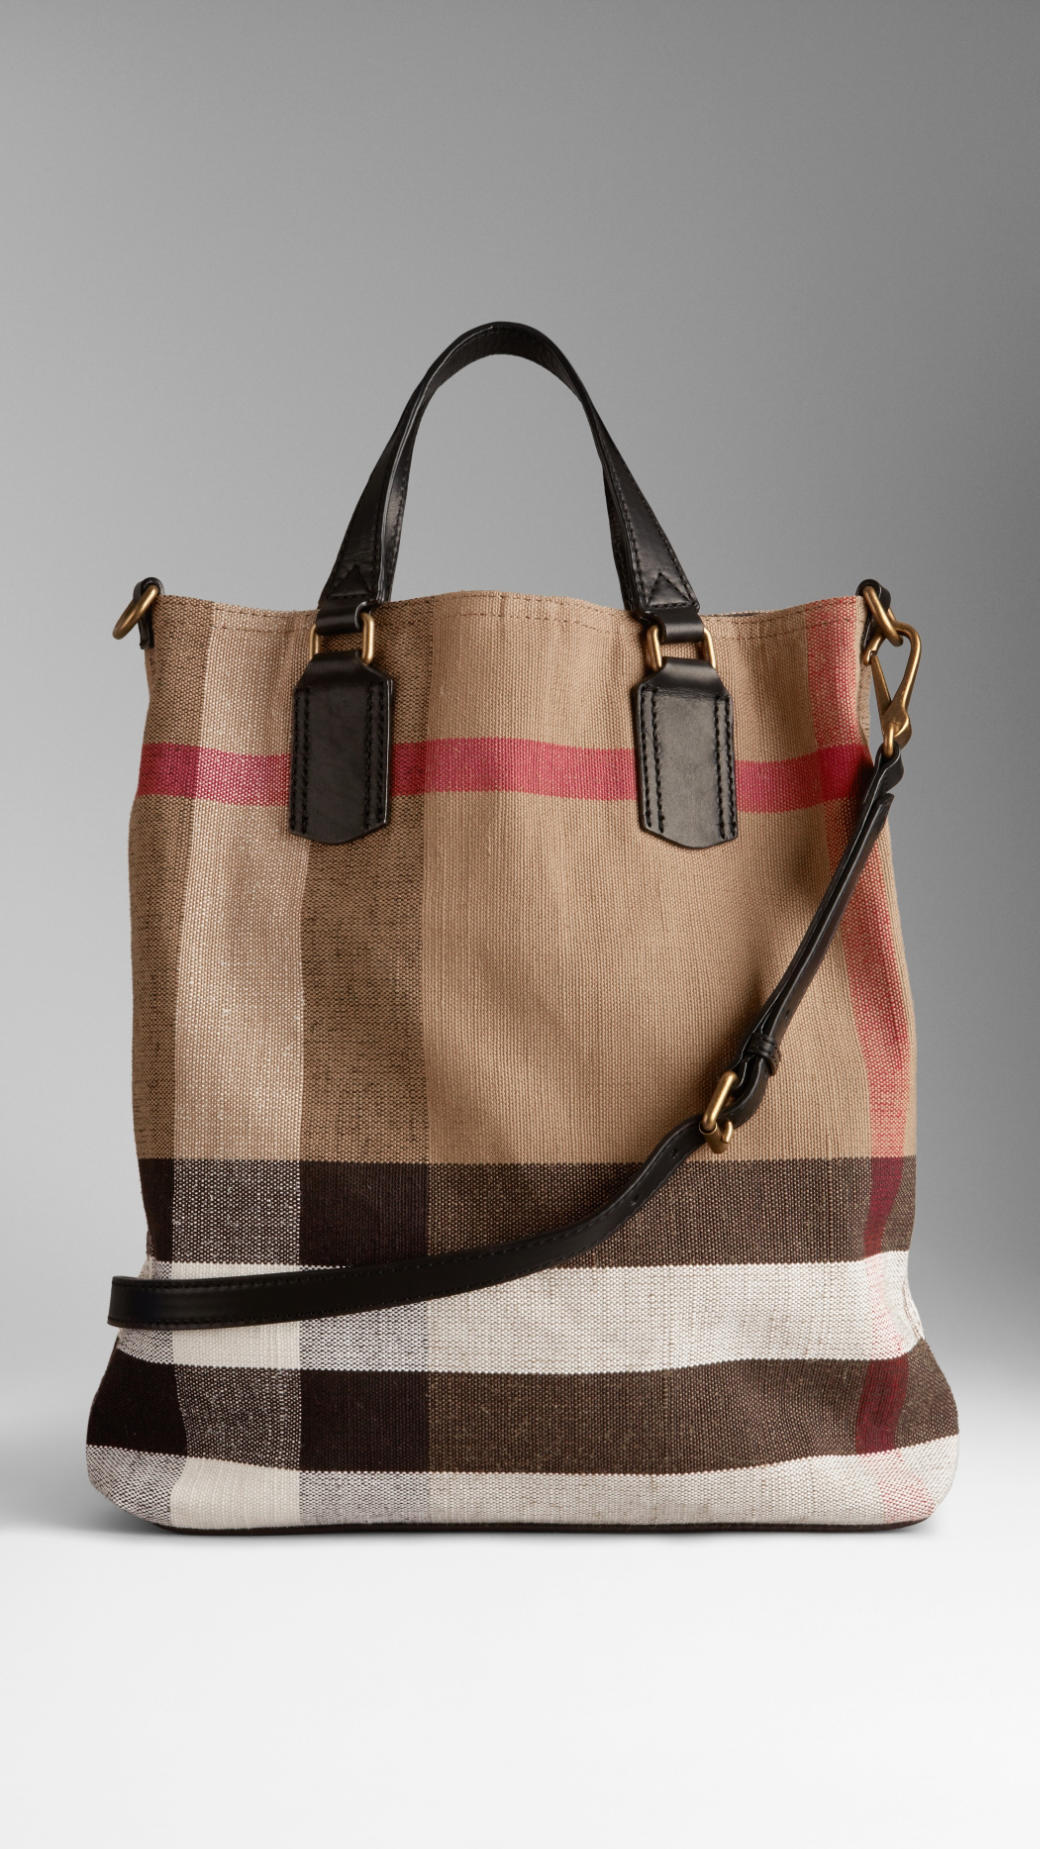 Burberry Medium Canvas Check Tote Bag in Black (Brown) - Lyst